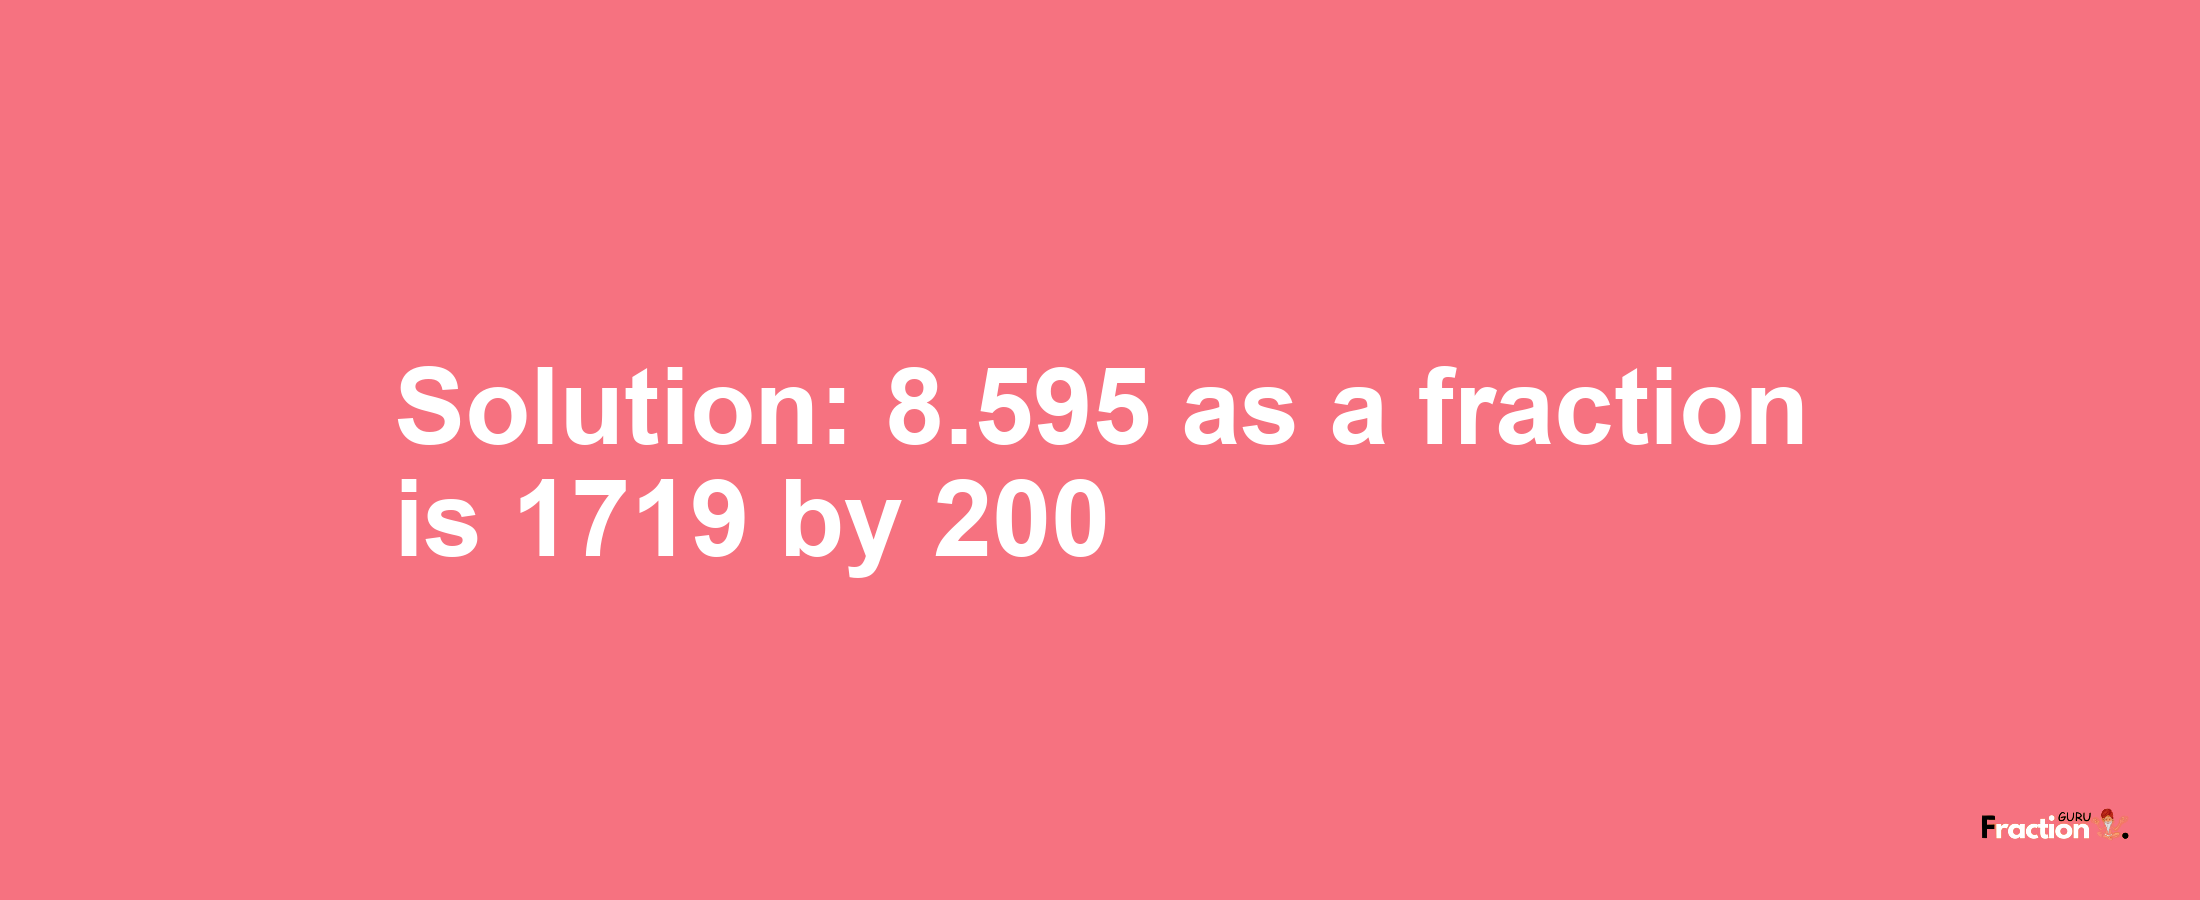 Solution:8.595 as a fraction is 1719/200